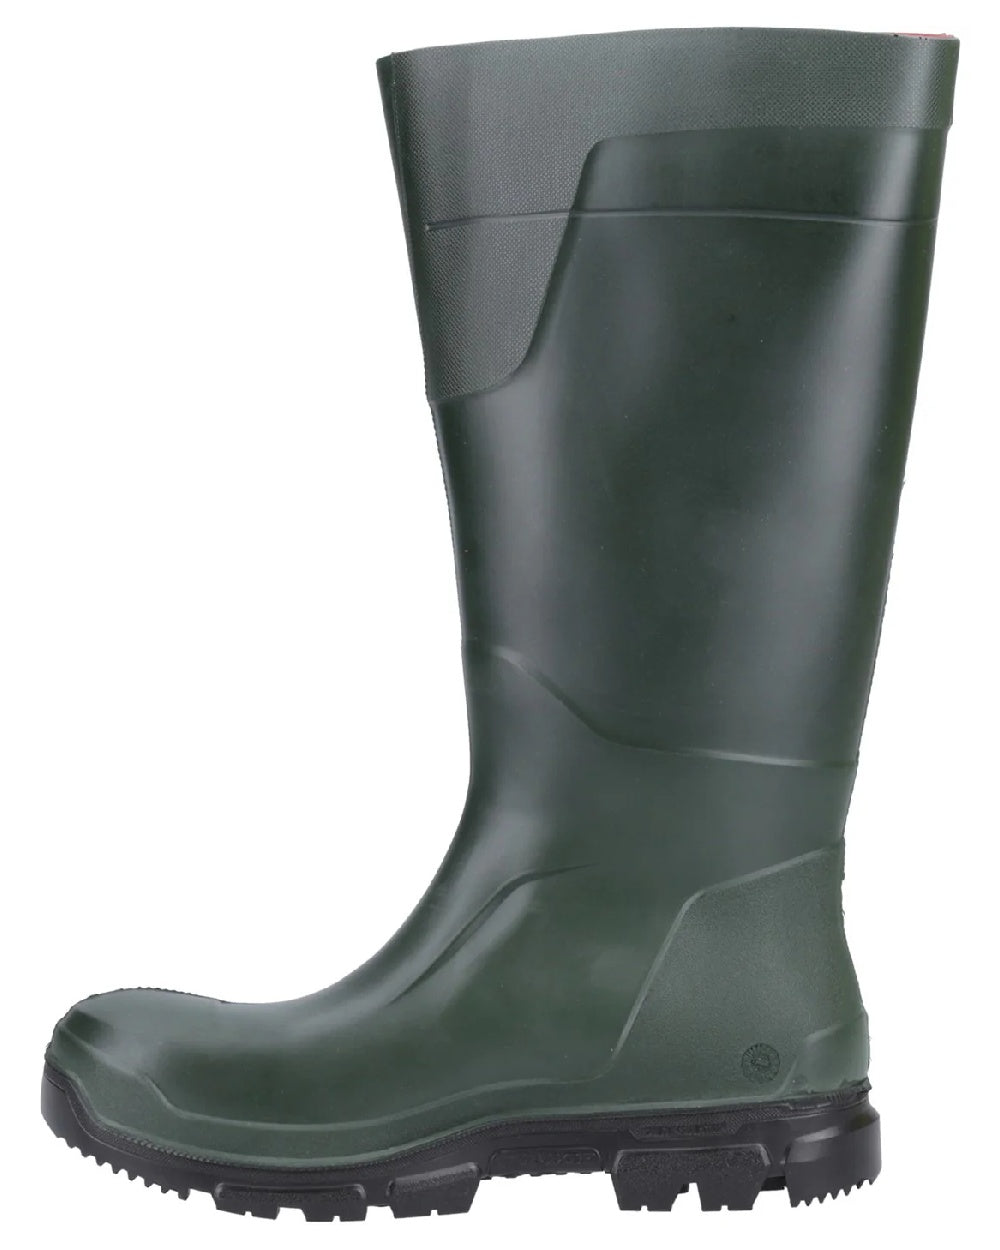 Green coloured Dunlop TerraPro Full Safety Wellingtons on white background 